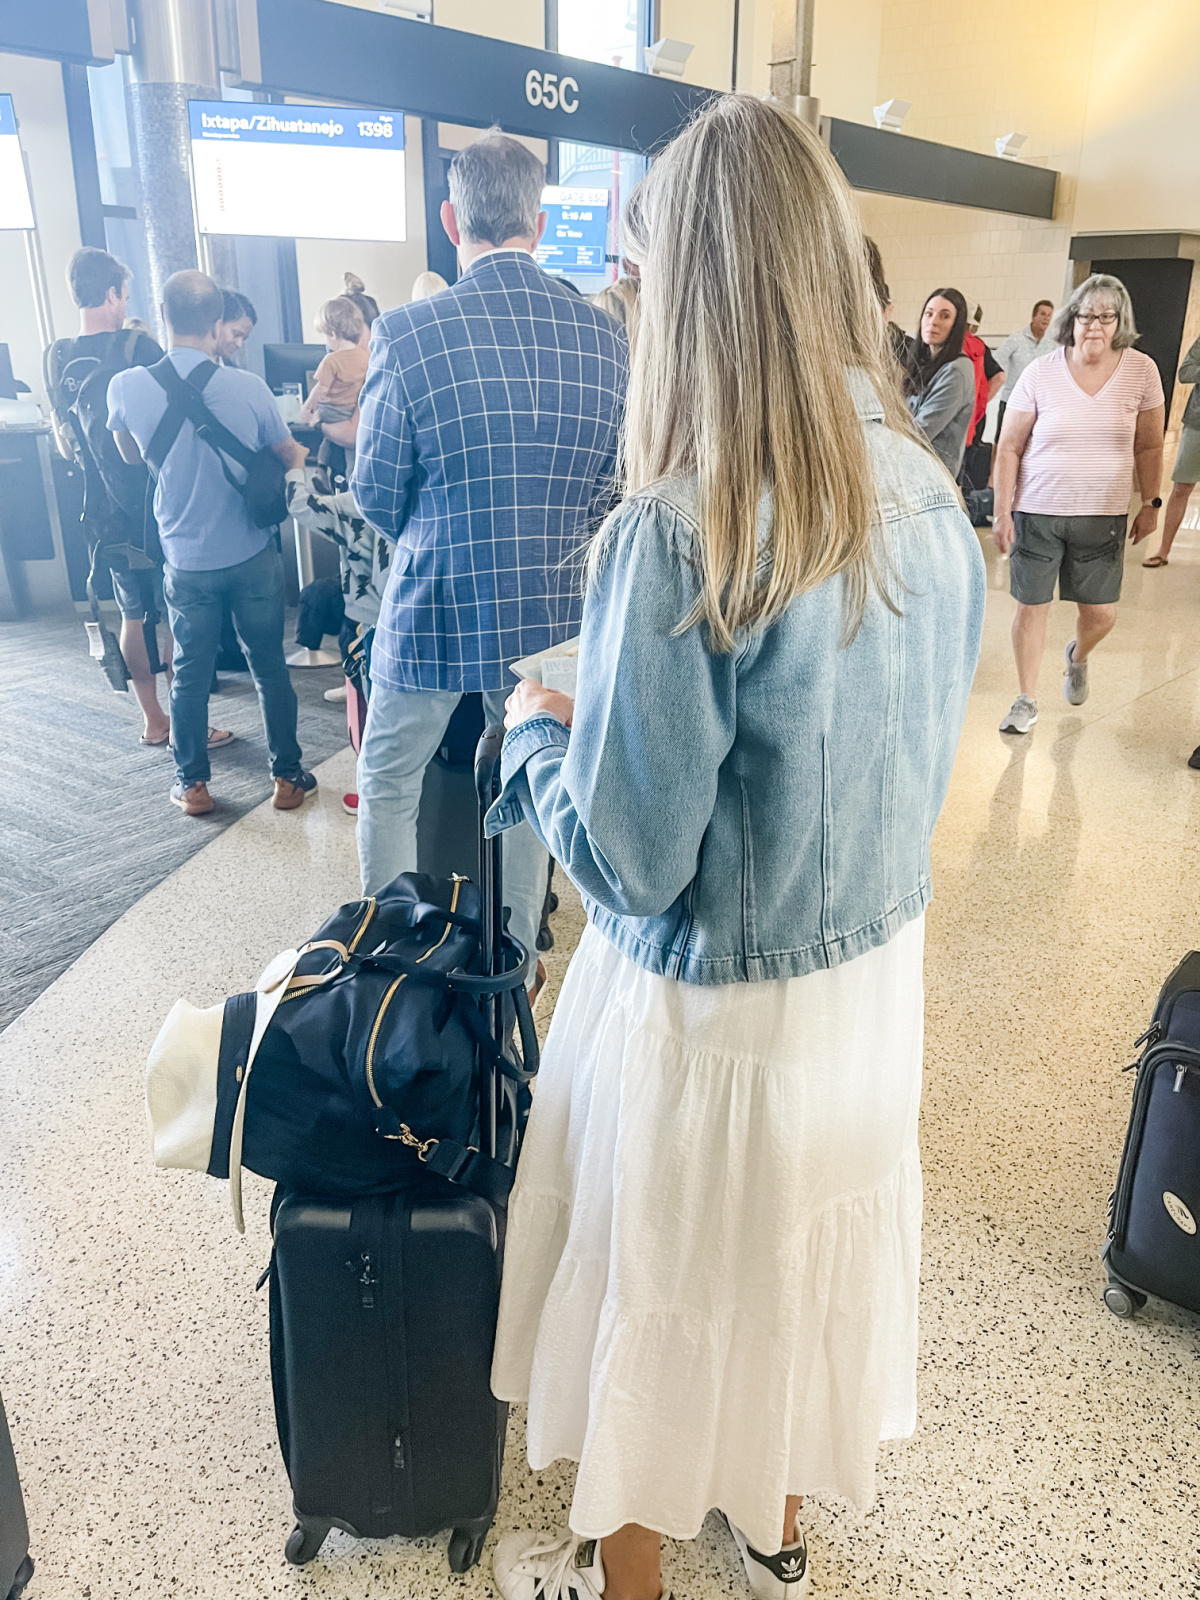 Woman standing next to luggage at airport.